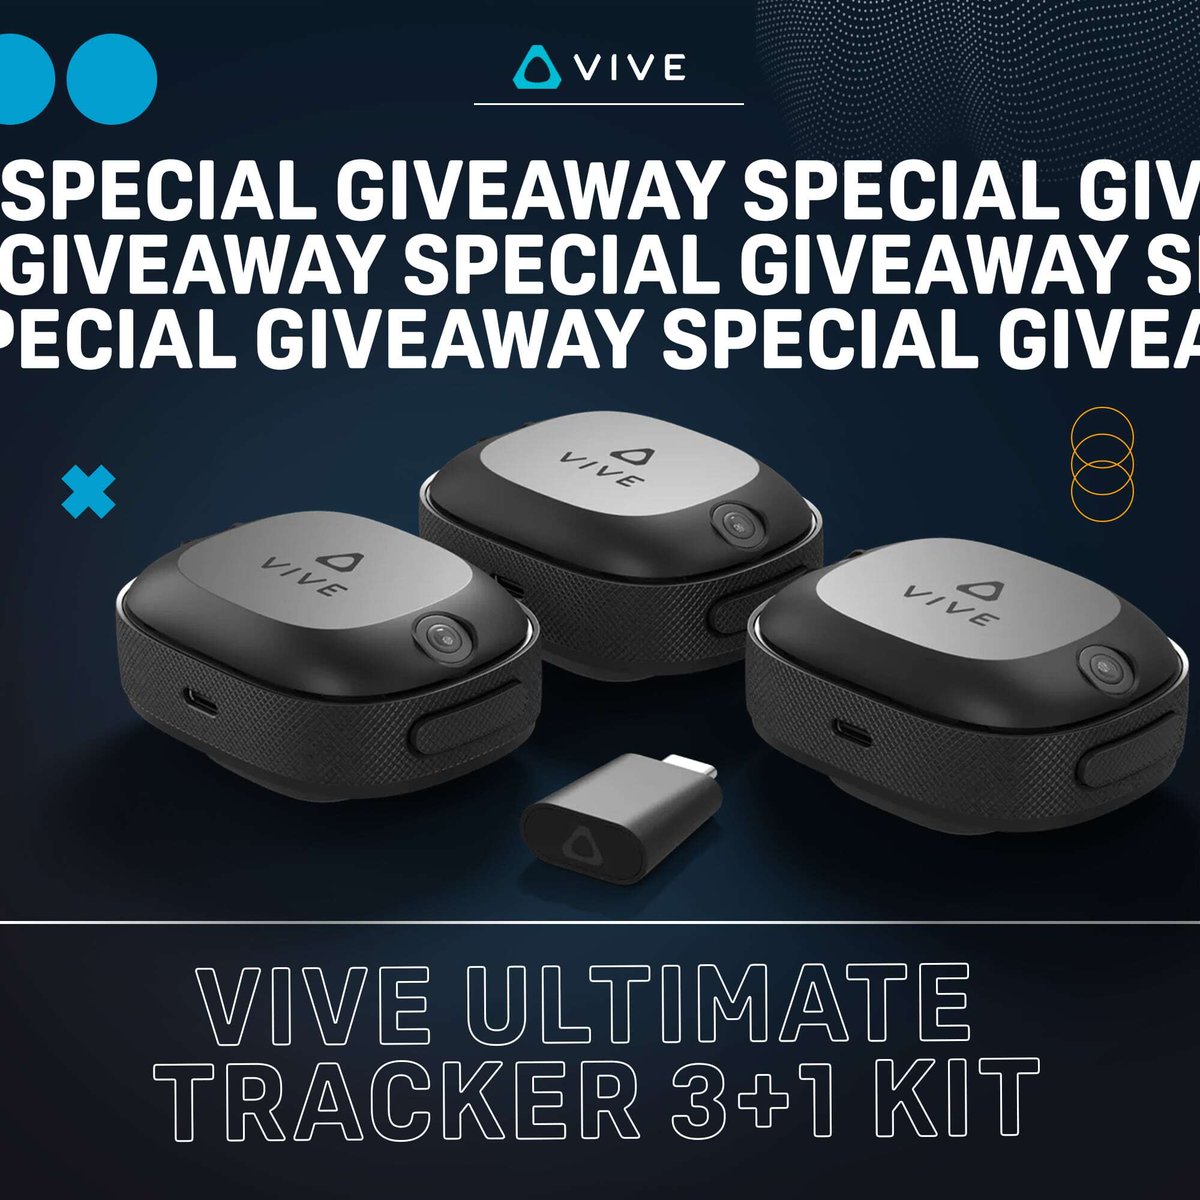 The moment you've been waiting for... 🥁 Ready to level up your VR experience? Repost this to enter! 🔁 #Giveaway #VIVEUltimateTracker #VR #HTCVIVE